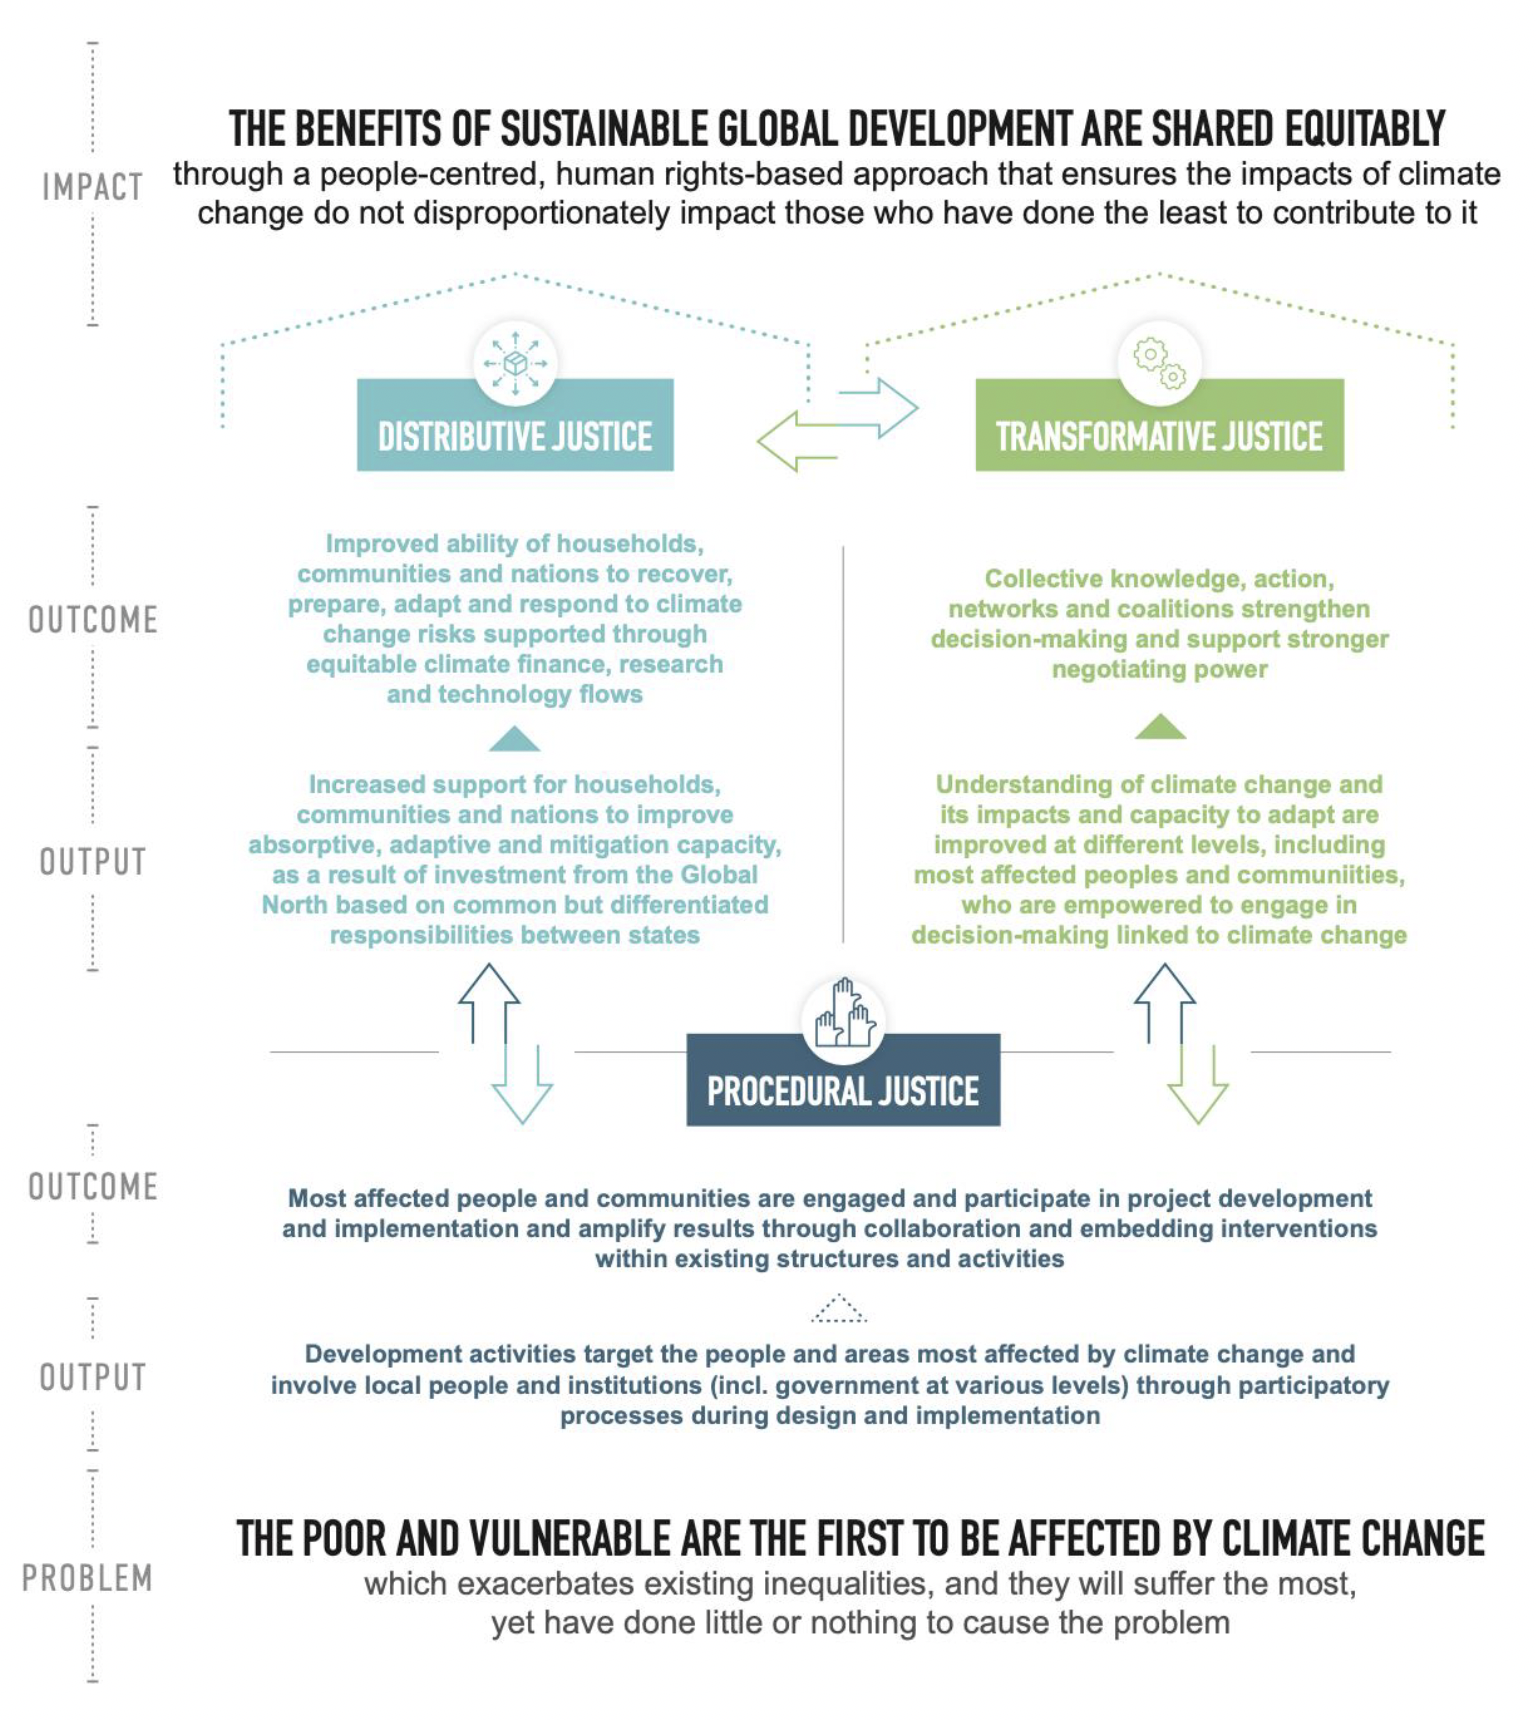 A flow chart (or theory of change) for climate justice which progresses upwards from the problem at the bottom of the page (that the poor and vulnerable are the first to be affected by climate change) to an ideal impact at the top of the page (the benefits of sustainable global development are shared equitably through a people centred, human-rights approach that ensures the impacts of climate change do not disproportionately impact those who have done the least to contribute to it.

Between the problem and solution three sections are shown as means of progressing from the problem. They are titled Procedural justice, Distributive Justice and Transformative Justice. Each has a subtitle reading Outcome and Output.

Under Procedural Justice subtitle of Output it reads “Development activities target the people and areas most affected by climate change and involve local people and institutions through participatory process during design and implementation”. Under Procedural Justice subtitle of Outcome it reads “Most affected people and communities are engaged and participate in project development and implementation and amplify results through collaboration and embedding interventions within existing structures and activities”.

Under Distributive Justice subtitle of Output it reads “Increased support for households, communities and nations to improve absorptive, adaptive and mitigation capacity as a result of investment from the Global North based on common but differentiated responsibilities between states”.  Under Distributive Justice subtitle of Outcome it reads “ Improved ability of households, communities and nations to recover, prepare, adapt and respond to climate change risks supported through equitable climate finance, research and technology flows”.

Under Transformative Justice subtitle of Output it reads “ understanding of climate change and it’s impacts and capacity to adapt are improved at different levels, including most affected peoples and communities, who are empowered to engage in decision making linked to climate change”. Under Transformative Justice subtitle of Outcome it reads “Collective knowledge, action, networks and coalitions strengthen decision making and support stronger negotiating power”.
